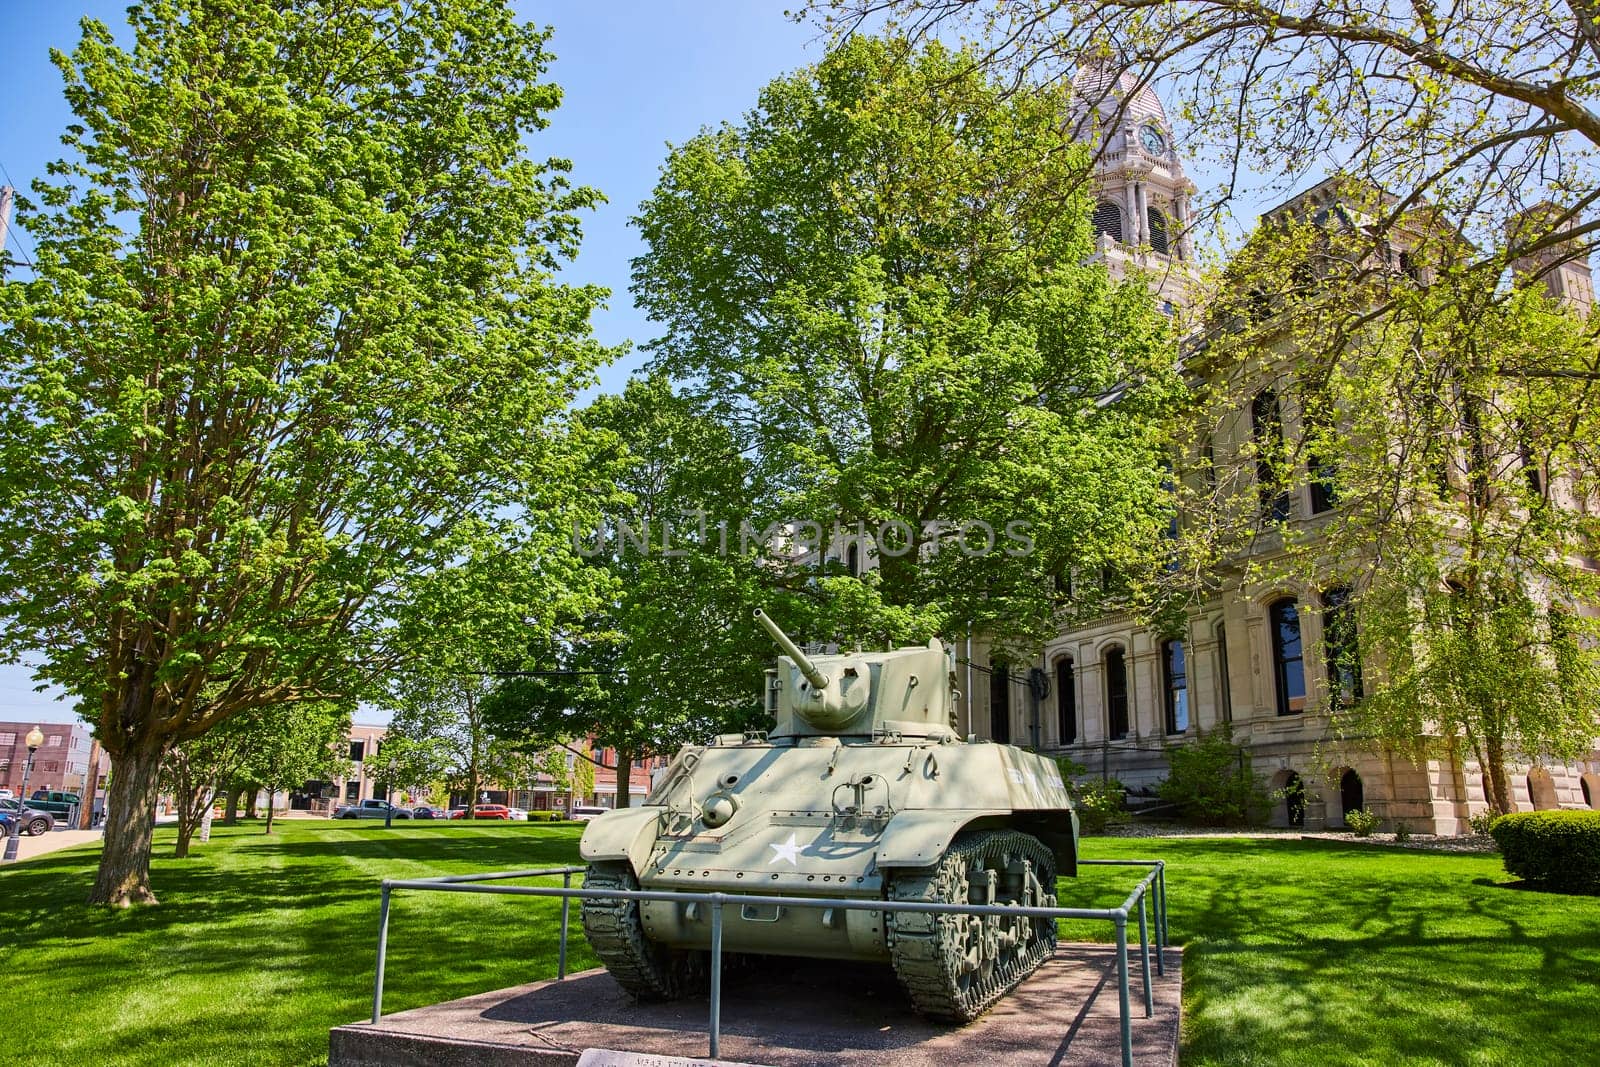 Vintage WWII tank on display at Kosciusko County Courthouse, Warsaw, framed by lush greenery.